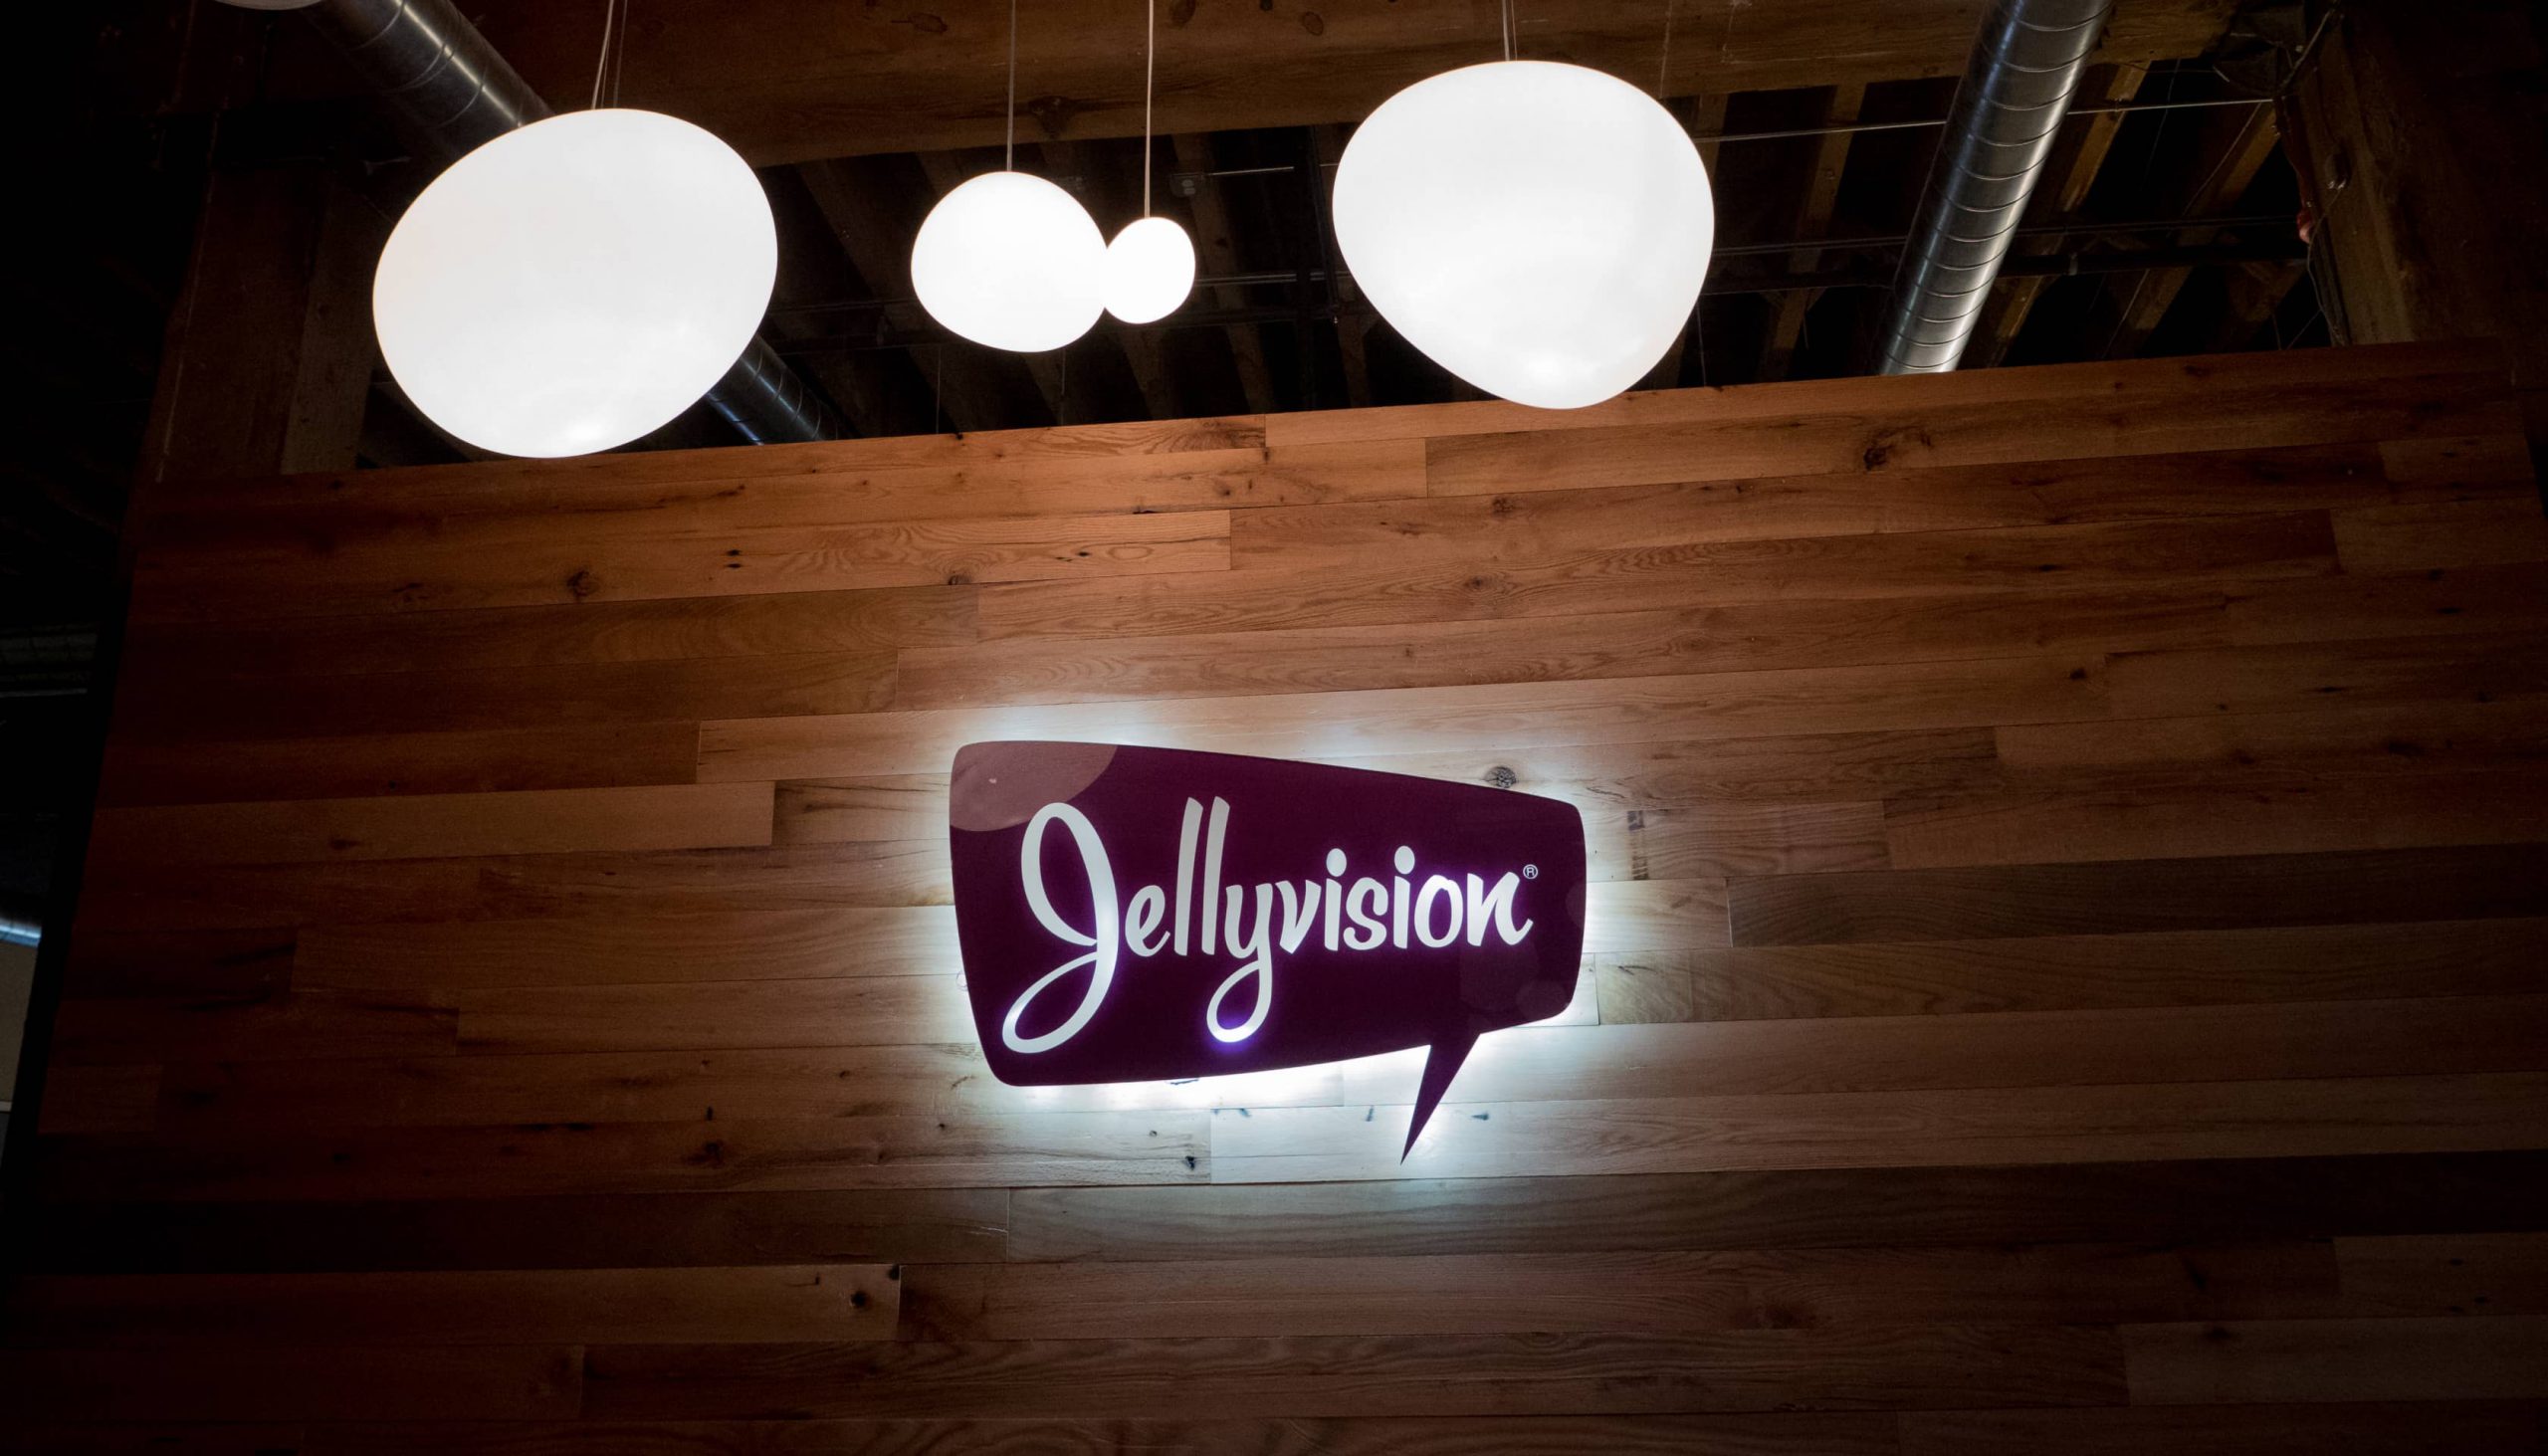 The Jellyvision office with the company's logo lit up